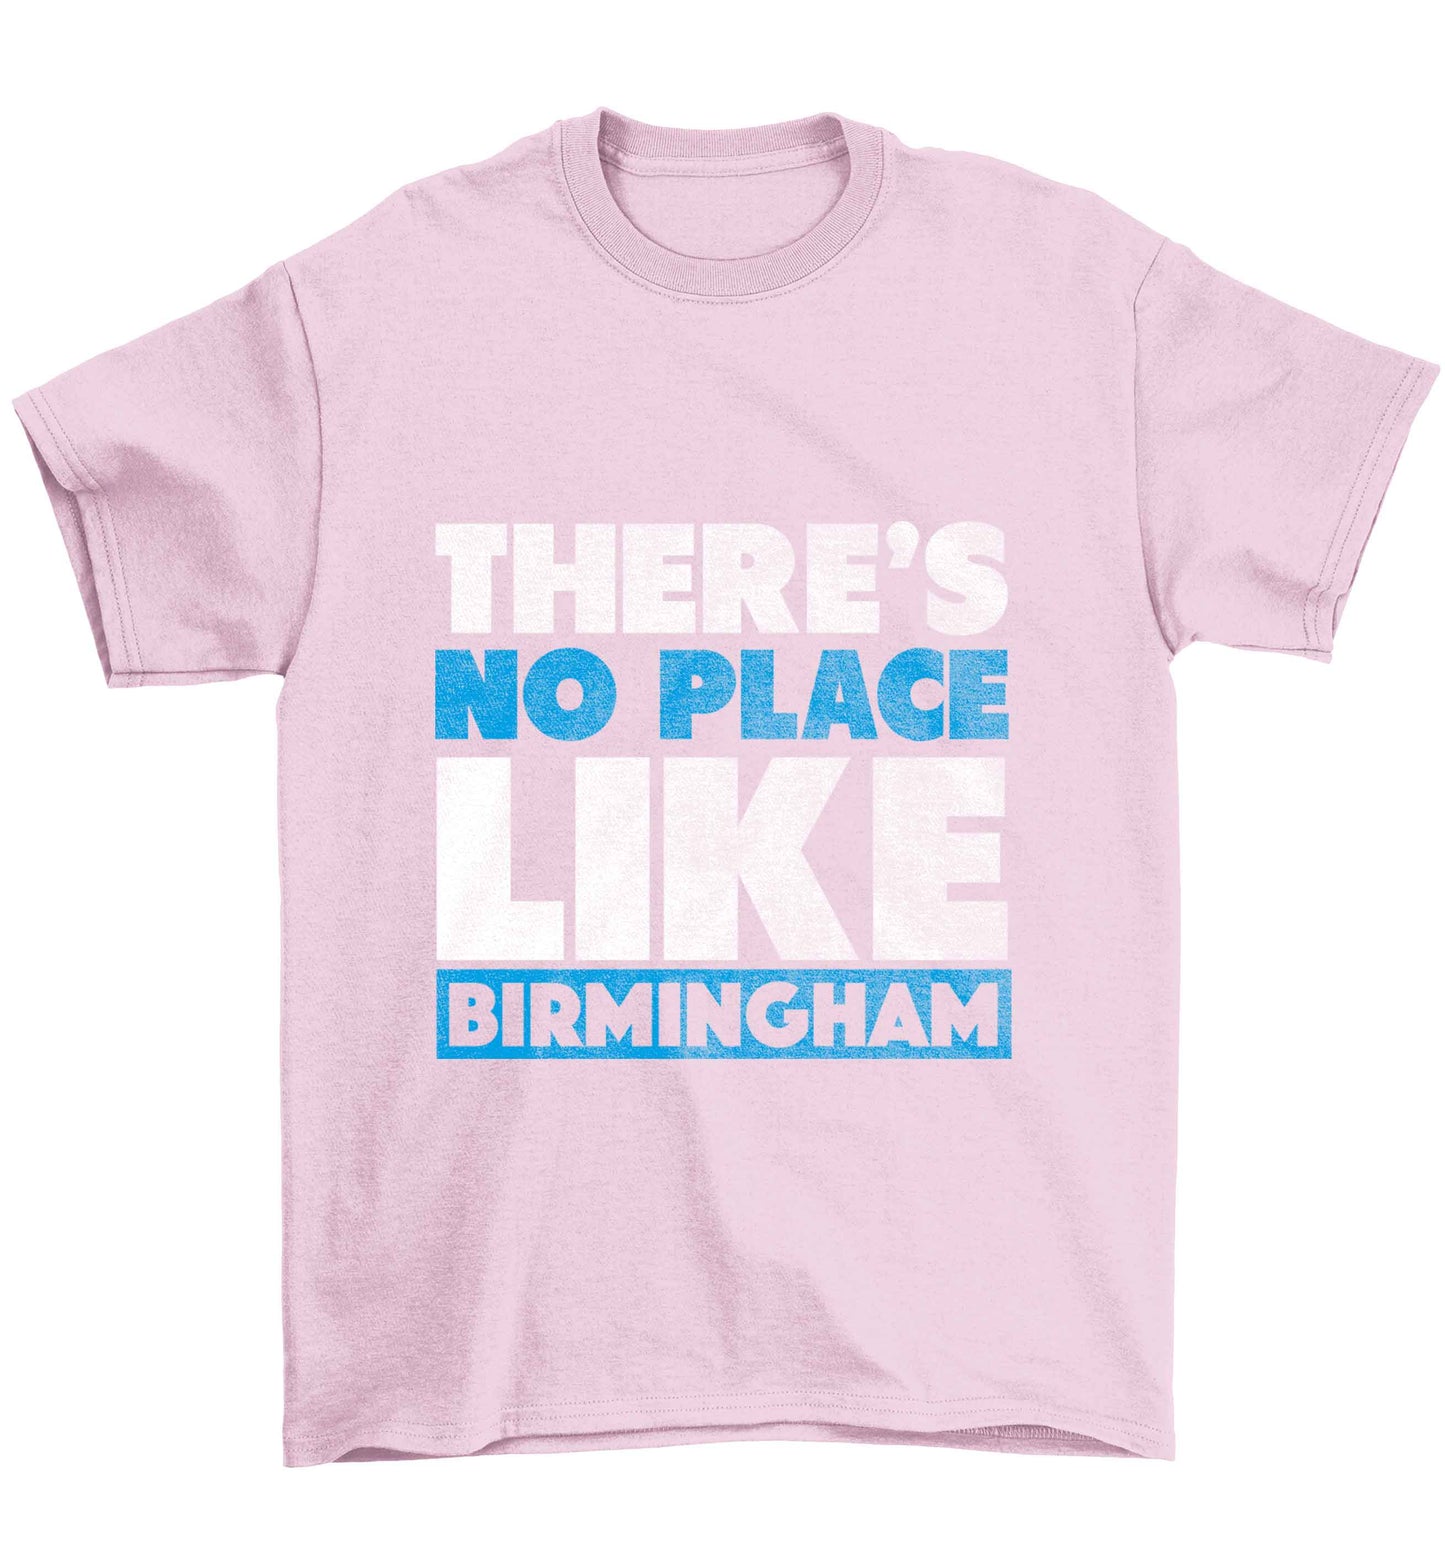 There's no place like Birmingham Children's light pink Tshirt 12-13 Years